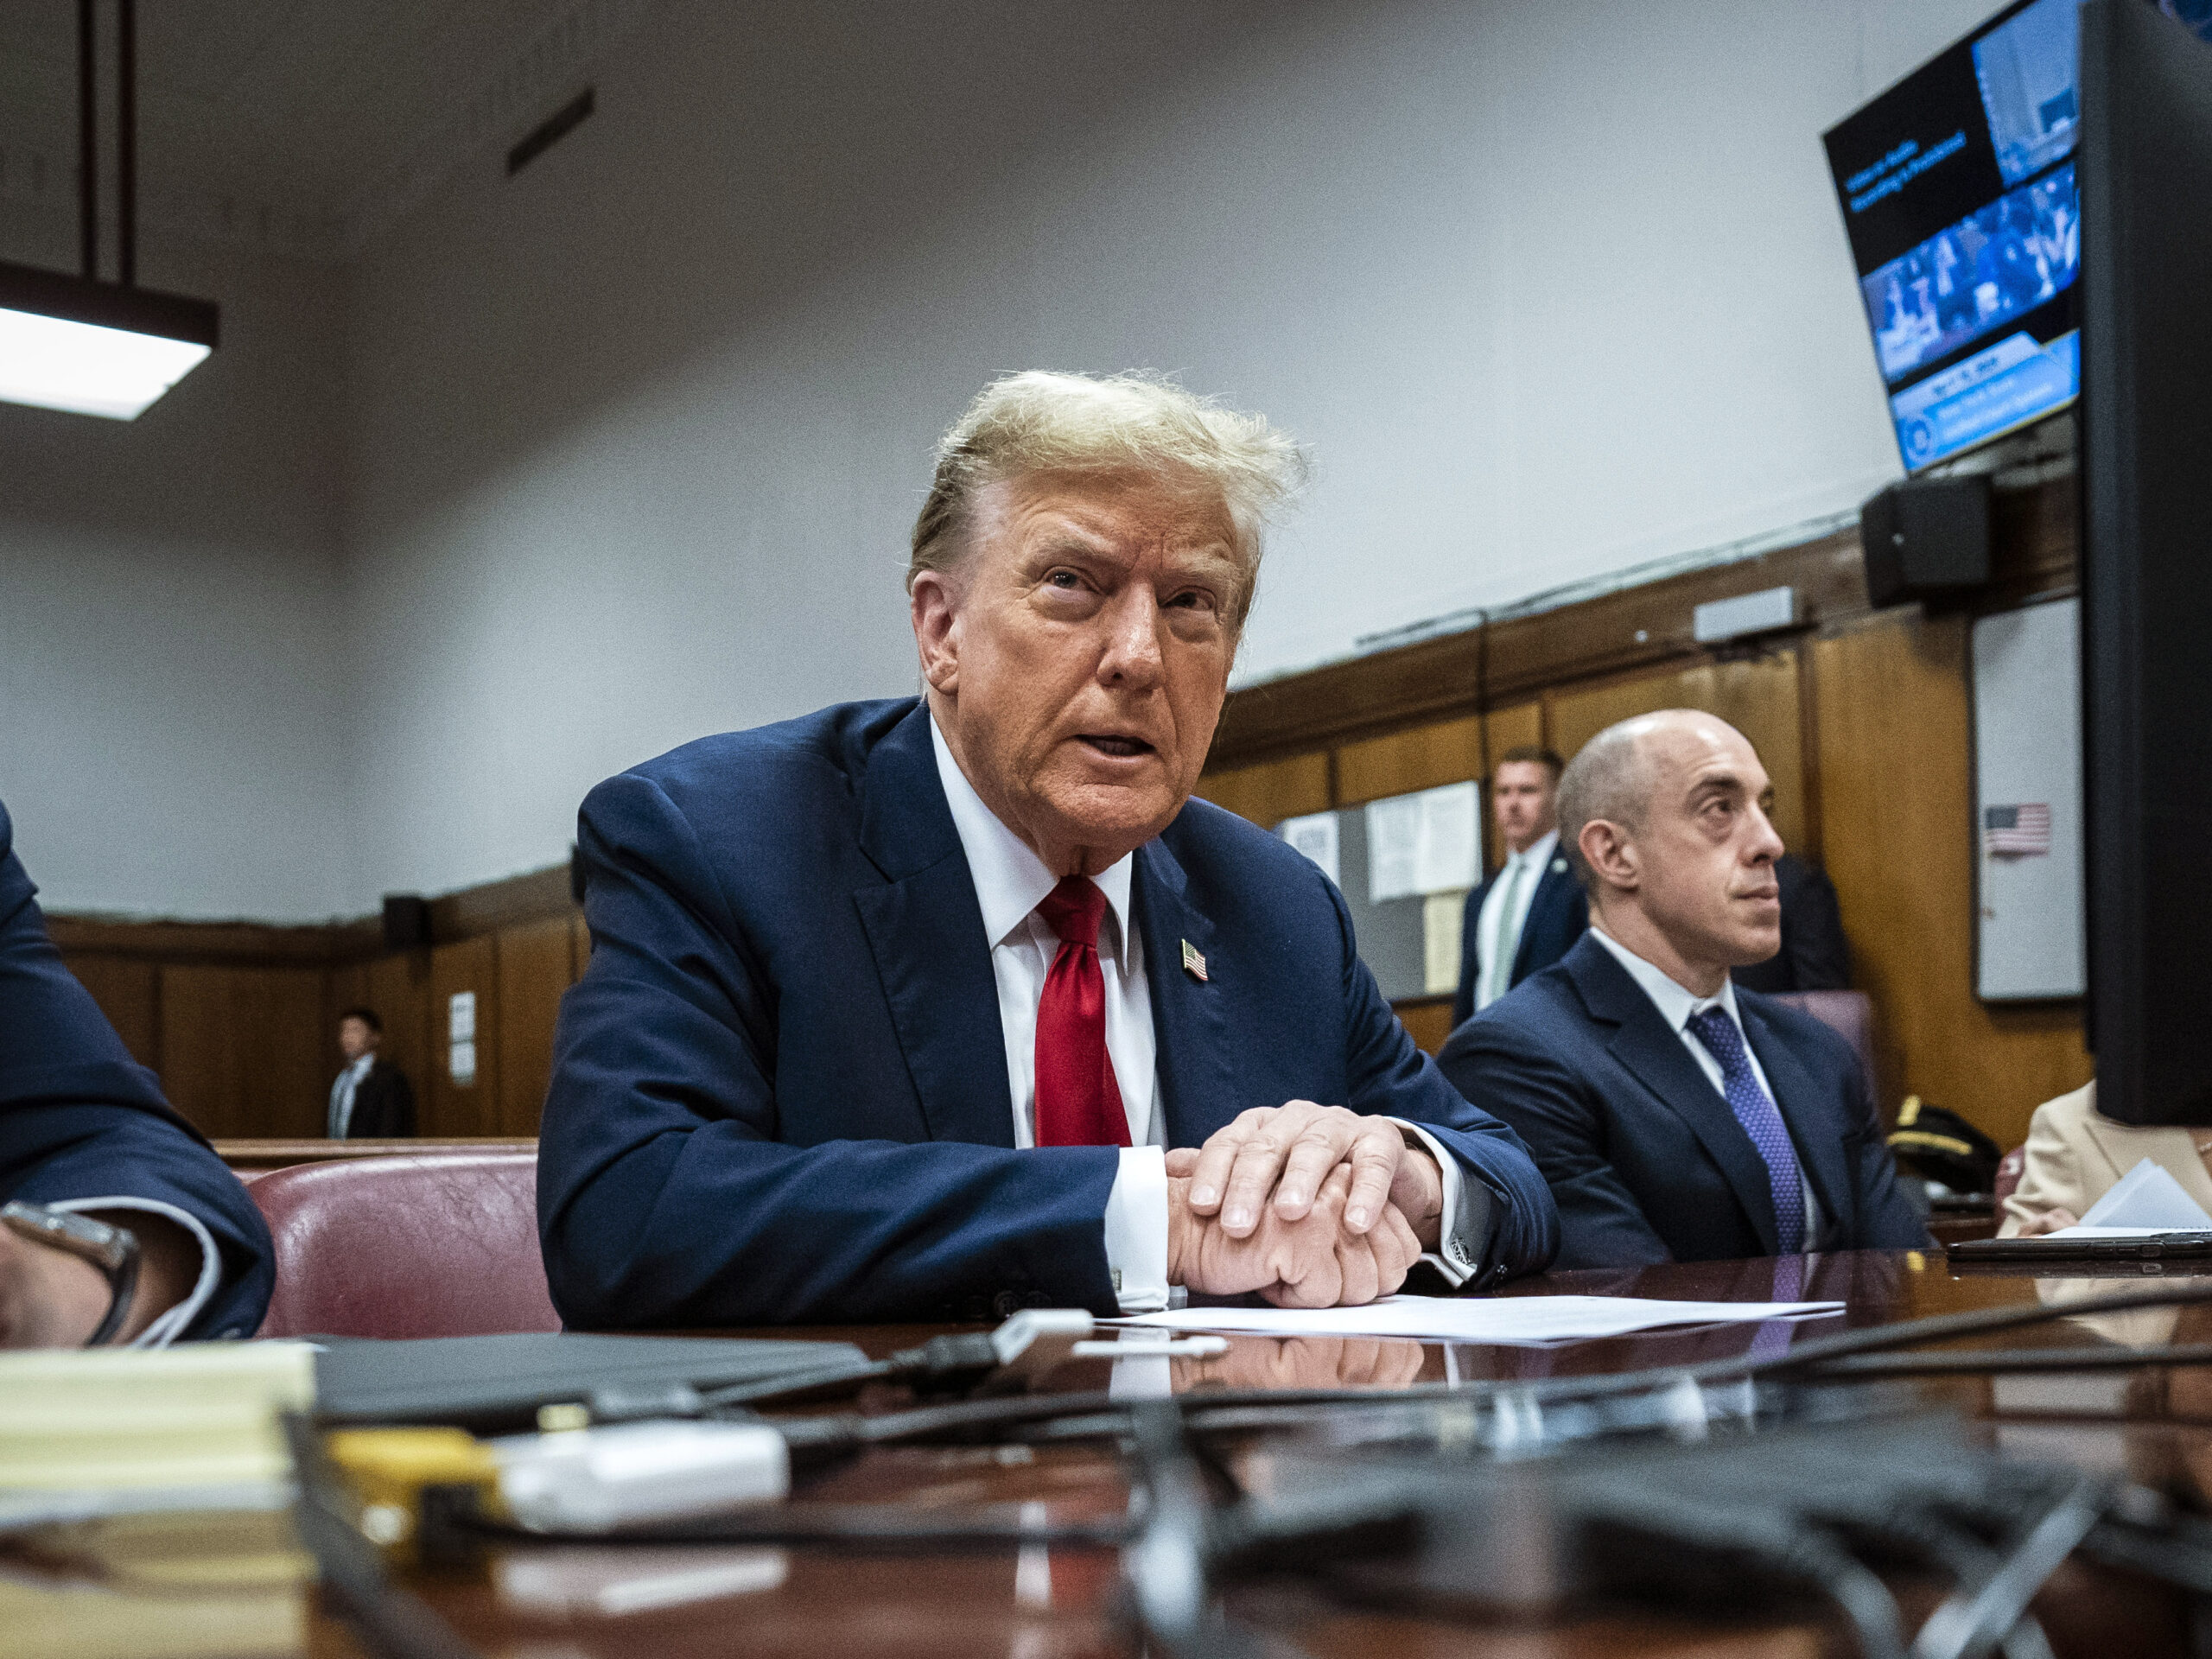 Former President Donald Trump appears with his legal team ahead of the start of jury selection Monday at Manhattan criminal court. Trump faces 34 felony counts of falsifying business records in the first of his criminal cases to go to trial.